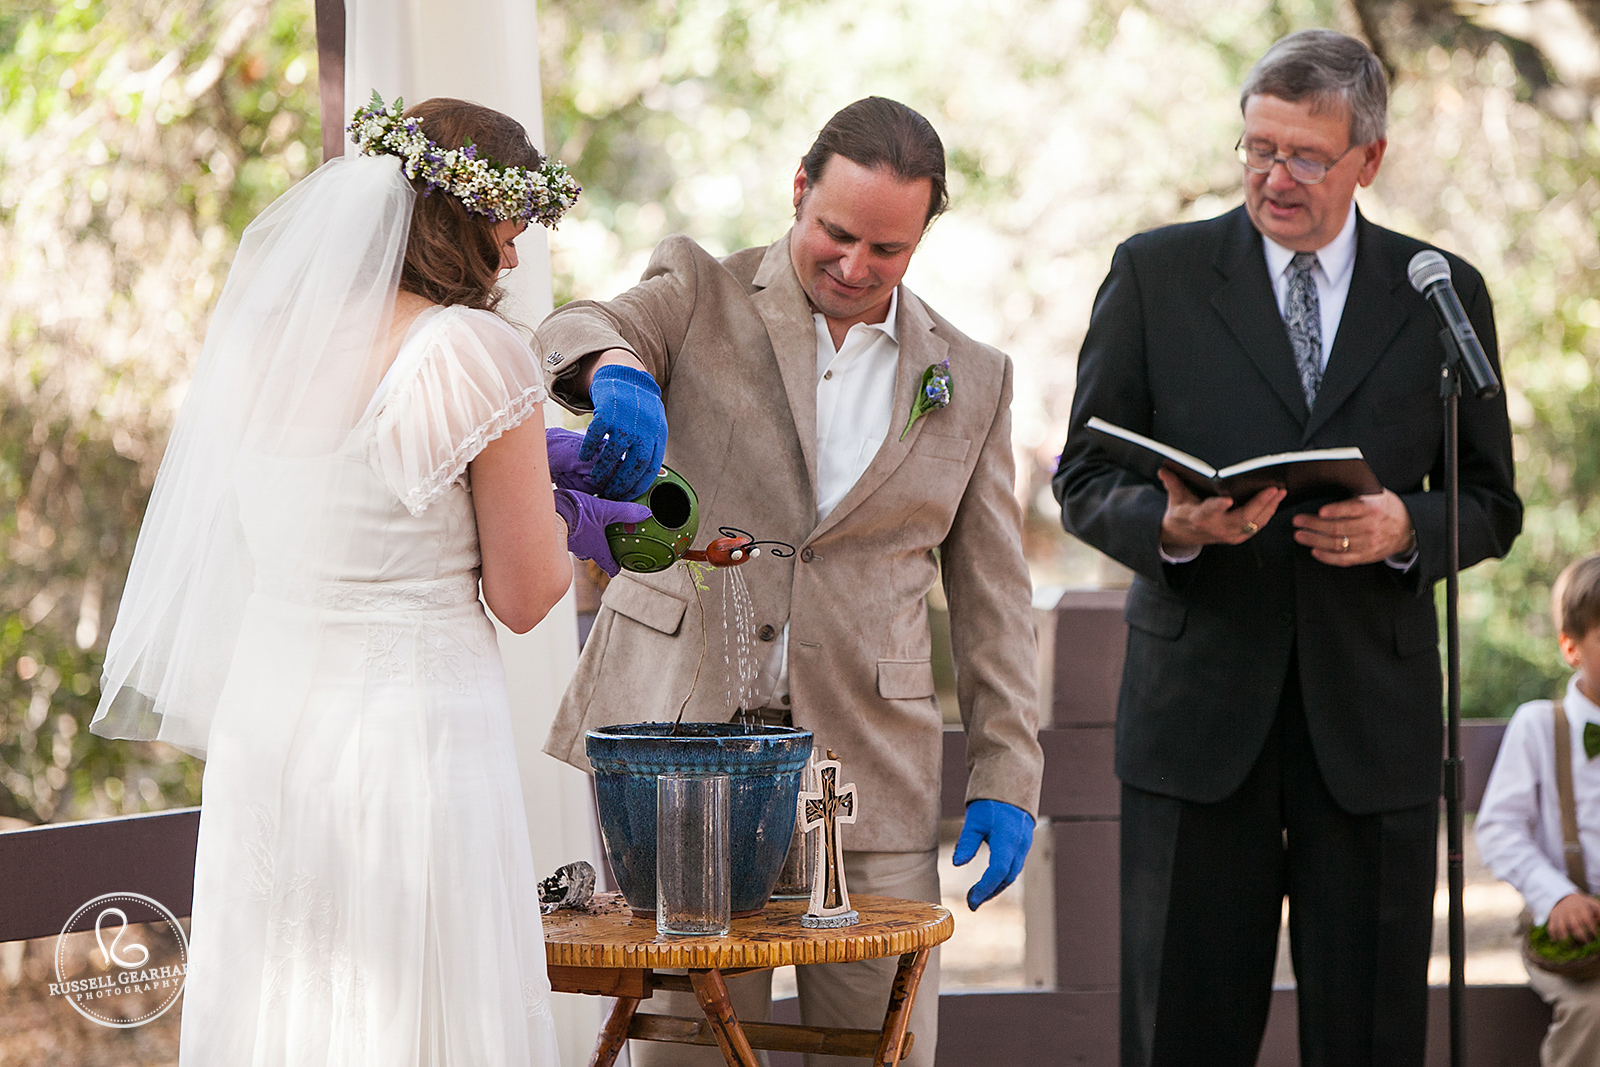 Wedding Flower Planting Ceremony – Oak Canyon Nature Center  – Russell Gearhart Photography – www.gearhartphoto.com  